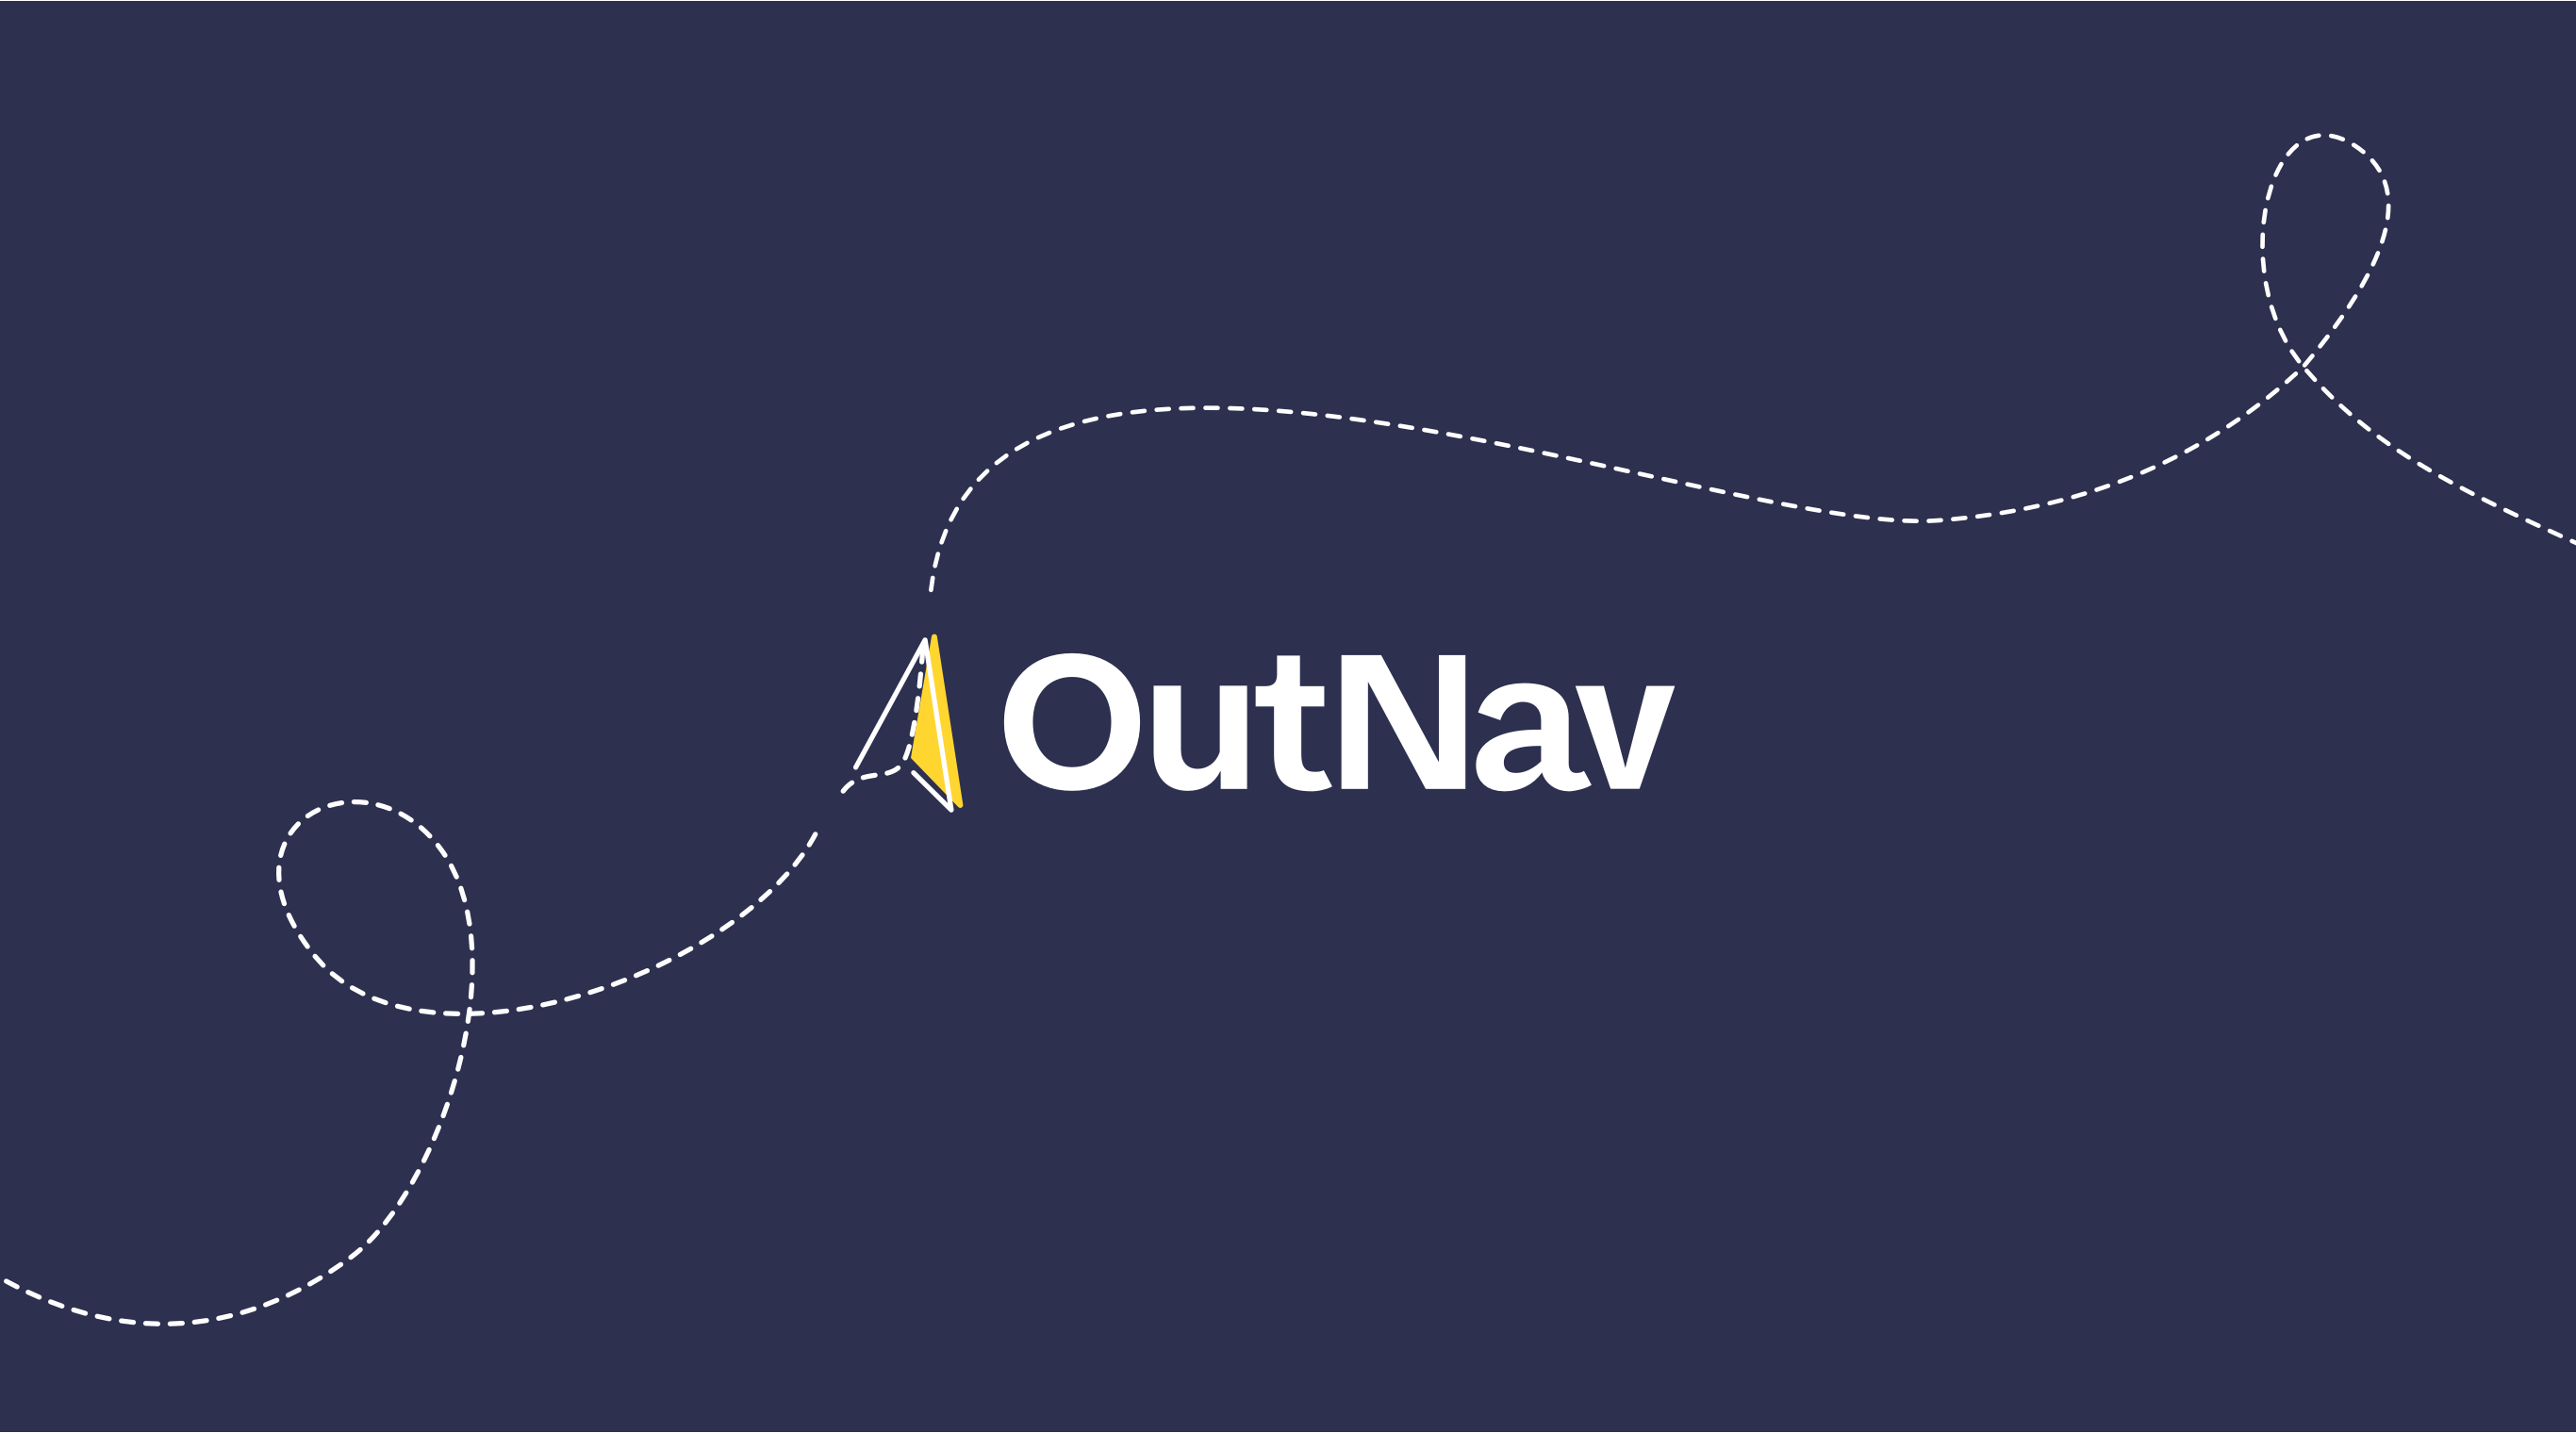 The “Outnav” logo sits in the middle of a dark blue background. To the left of a name is an outline of a paper plane icon. The plane’s twisted flightpath is denoted by a white broken line.